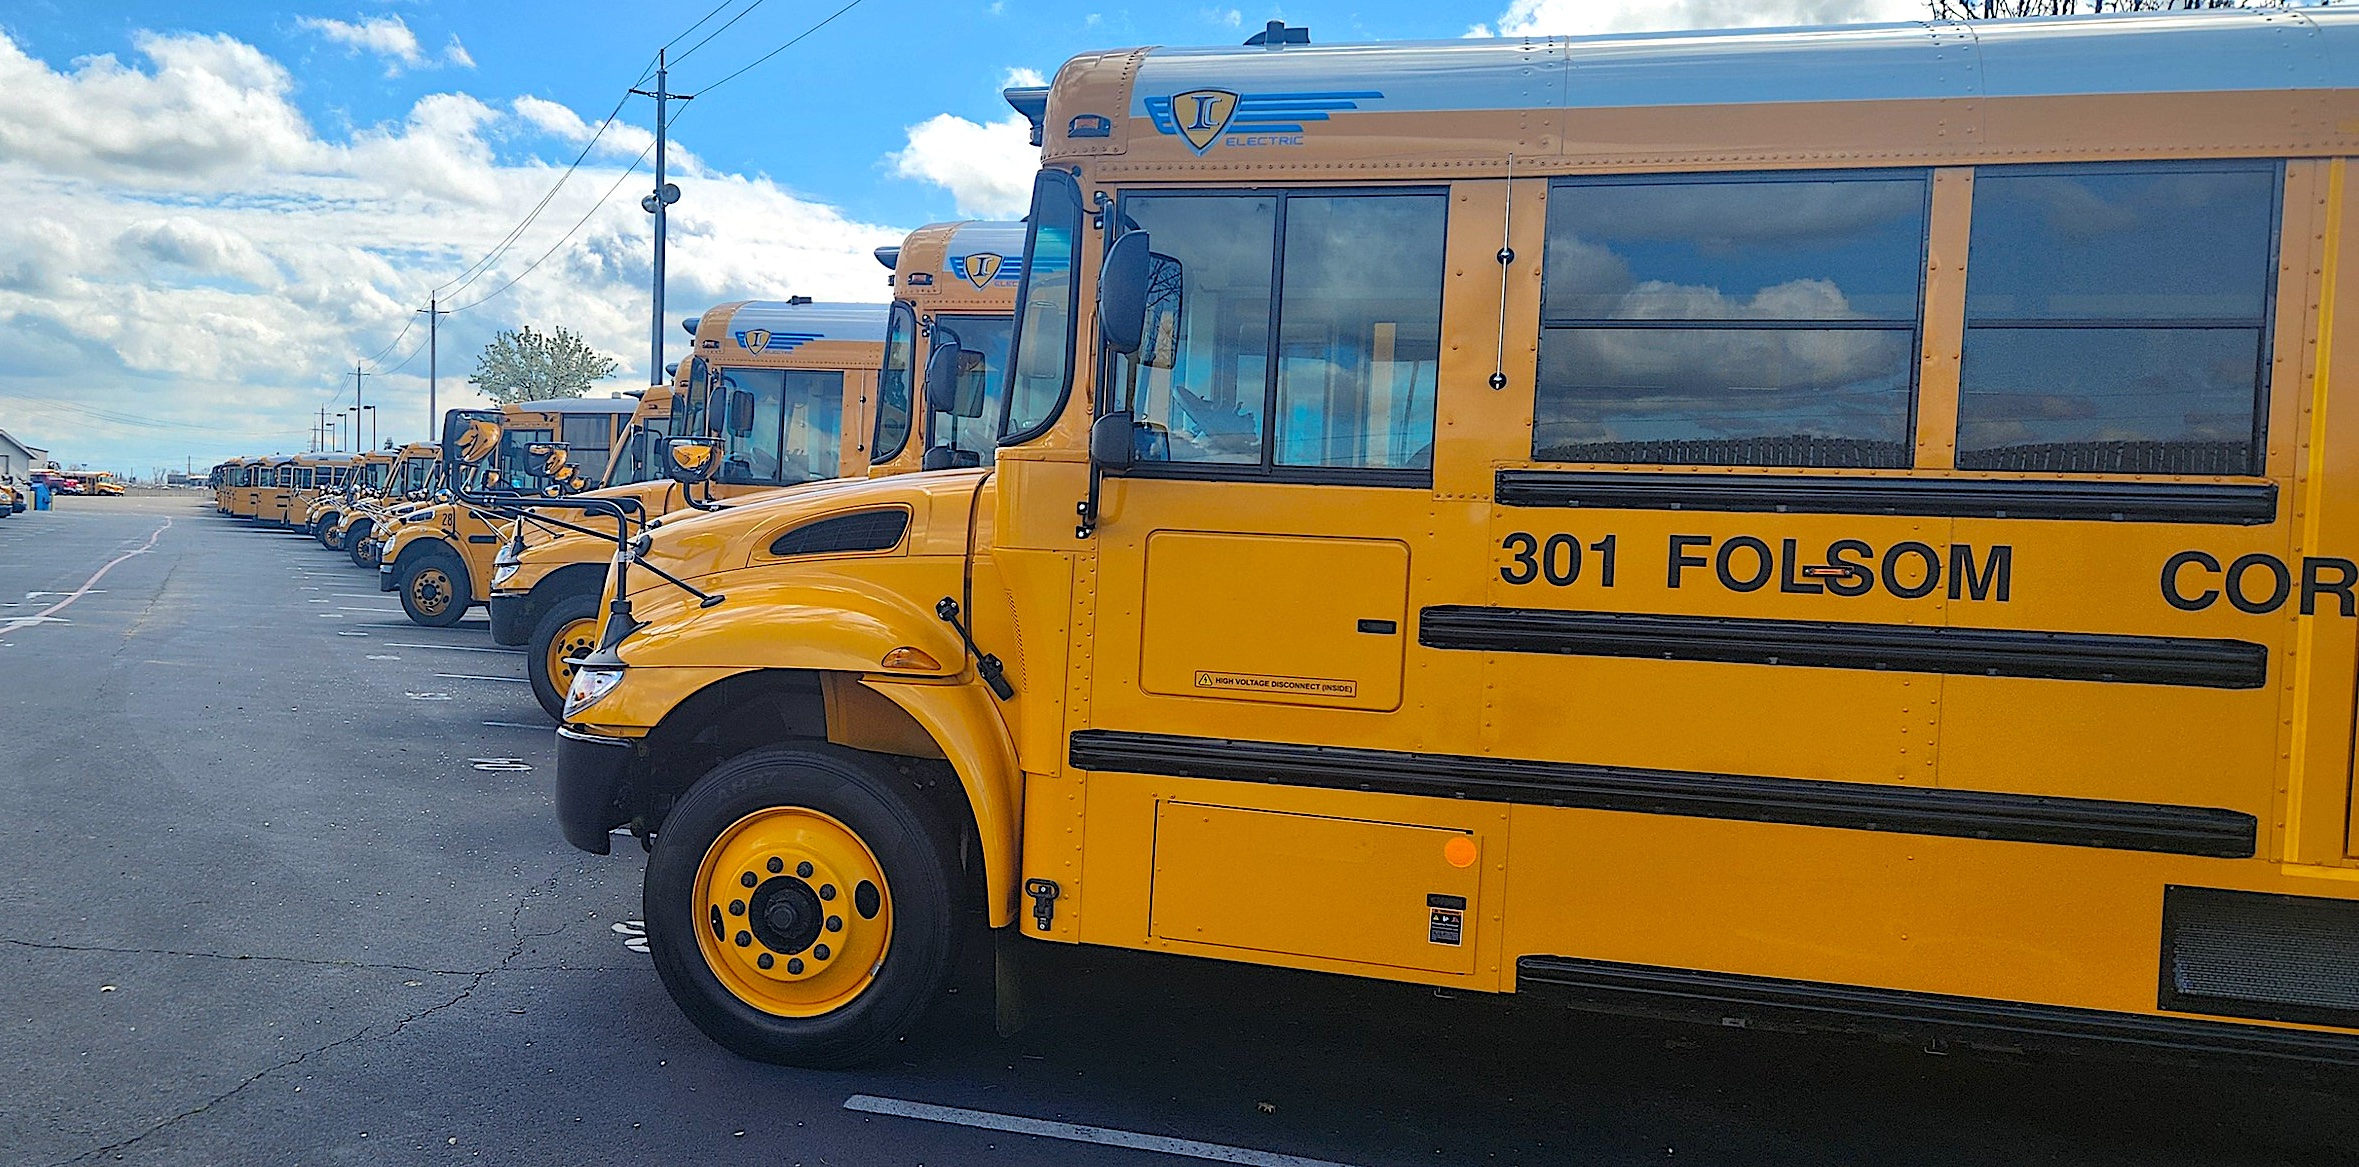 Folsom Cordova Unified School District adds 4 electric busses to fleet